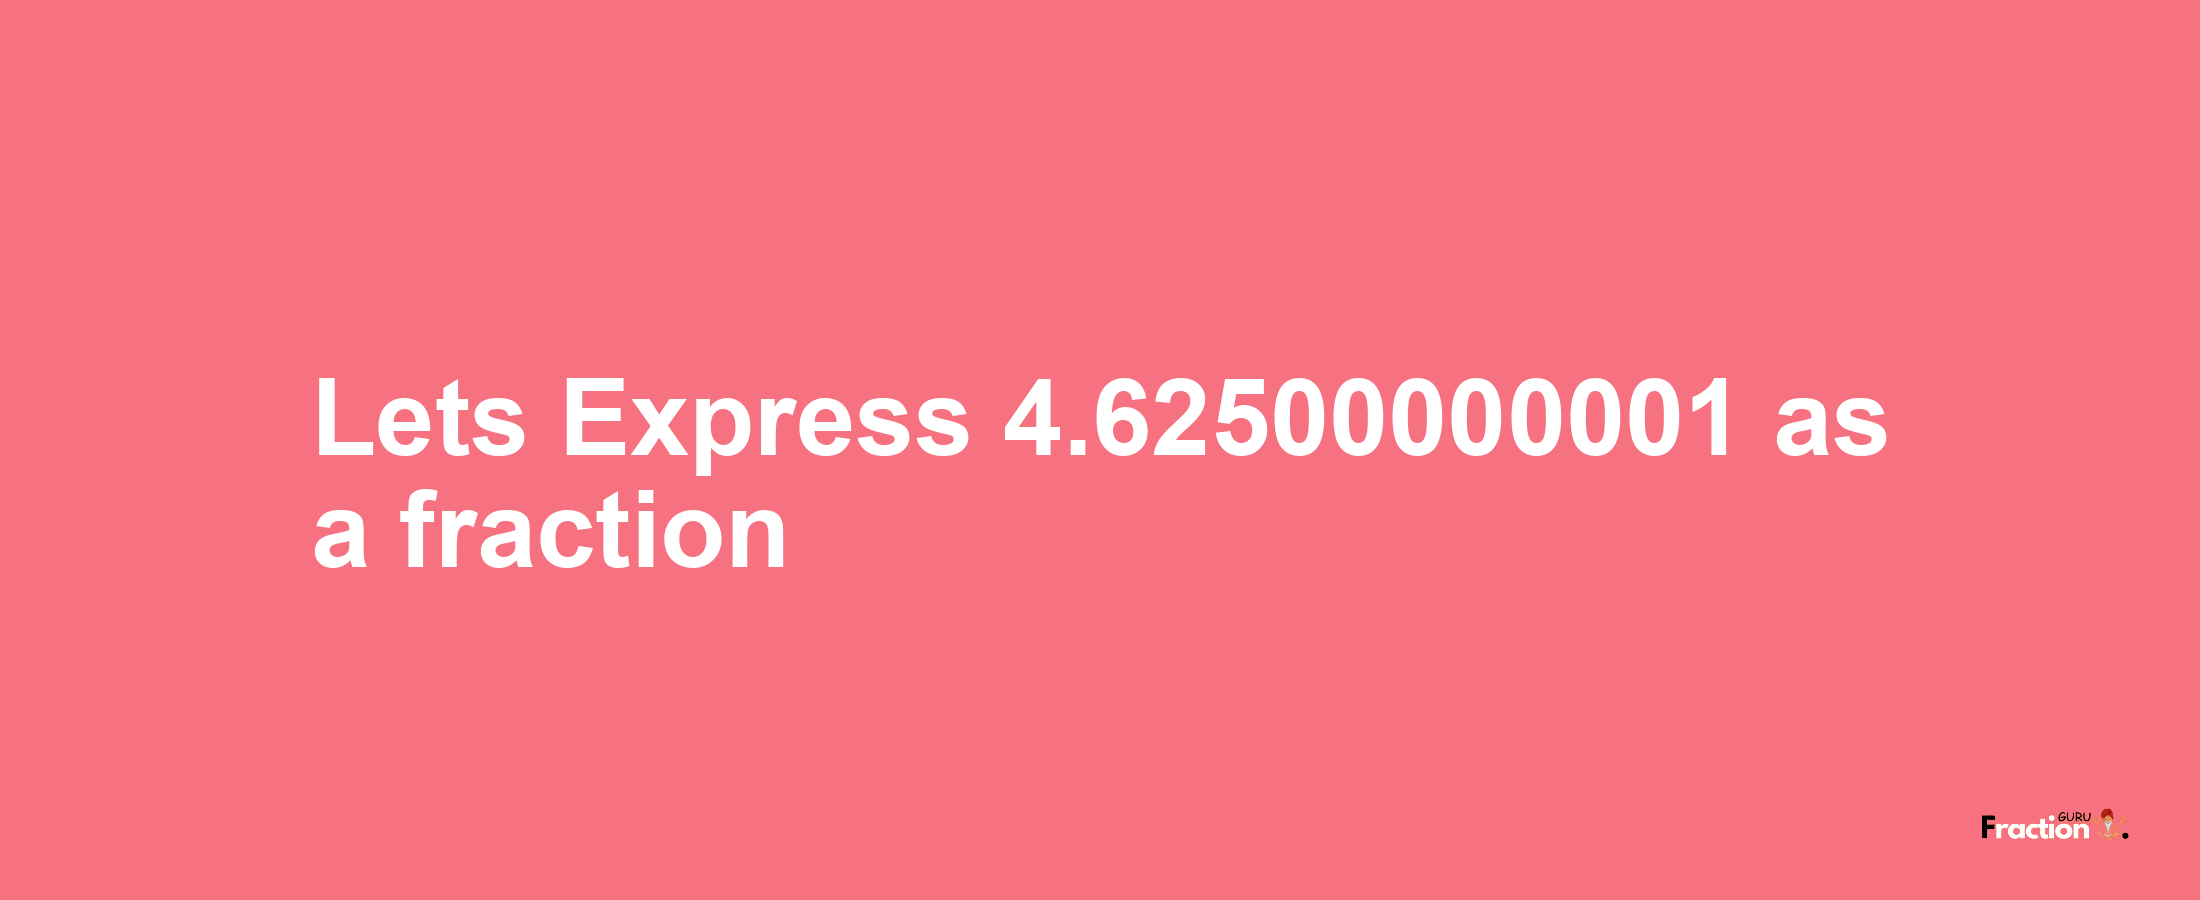 Lets Express 4.62500000001 as afraction